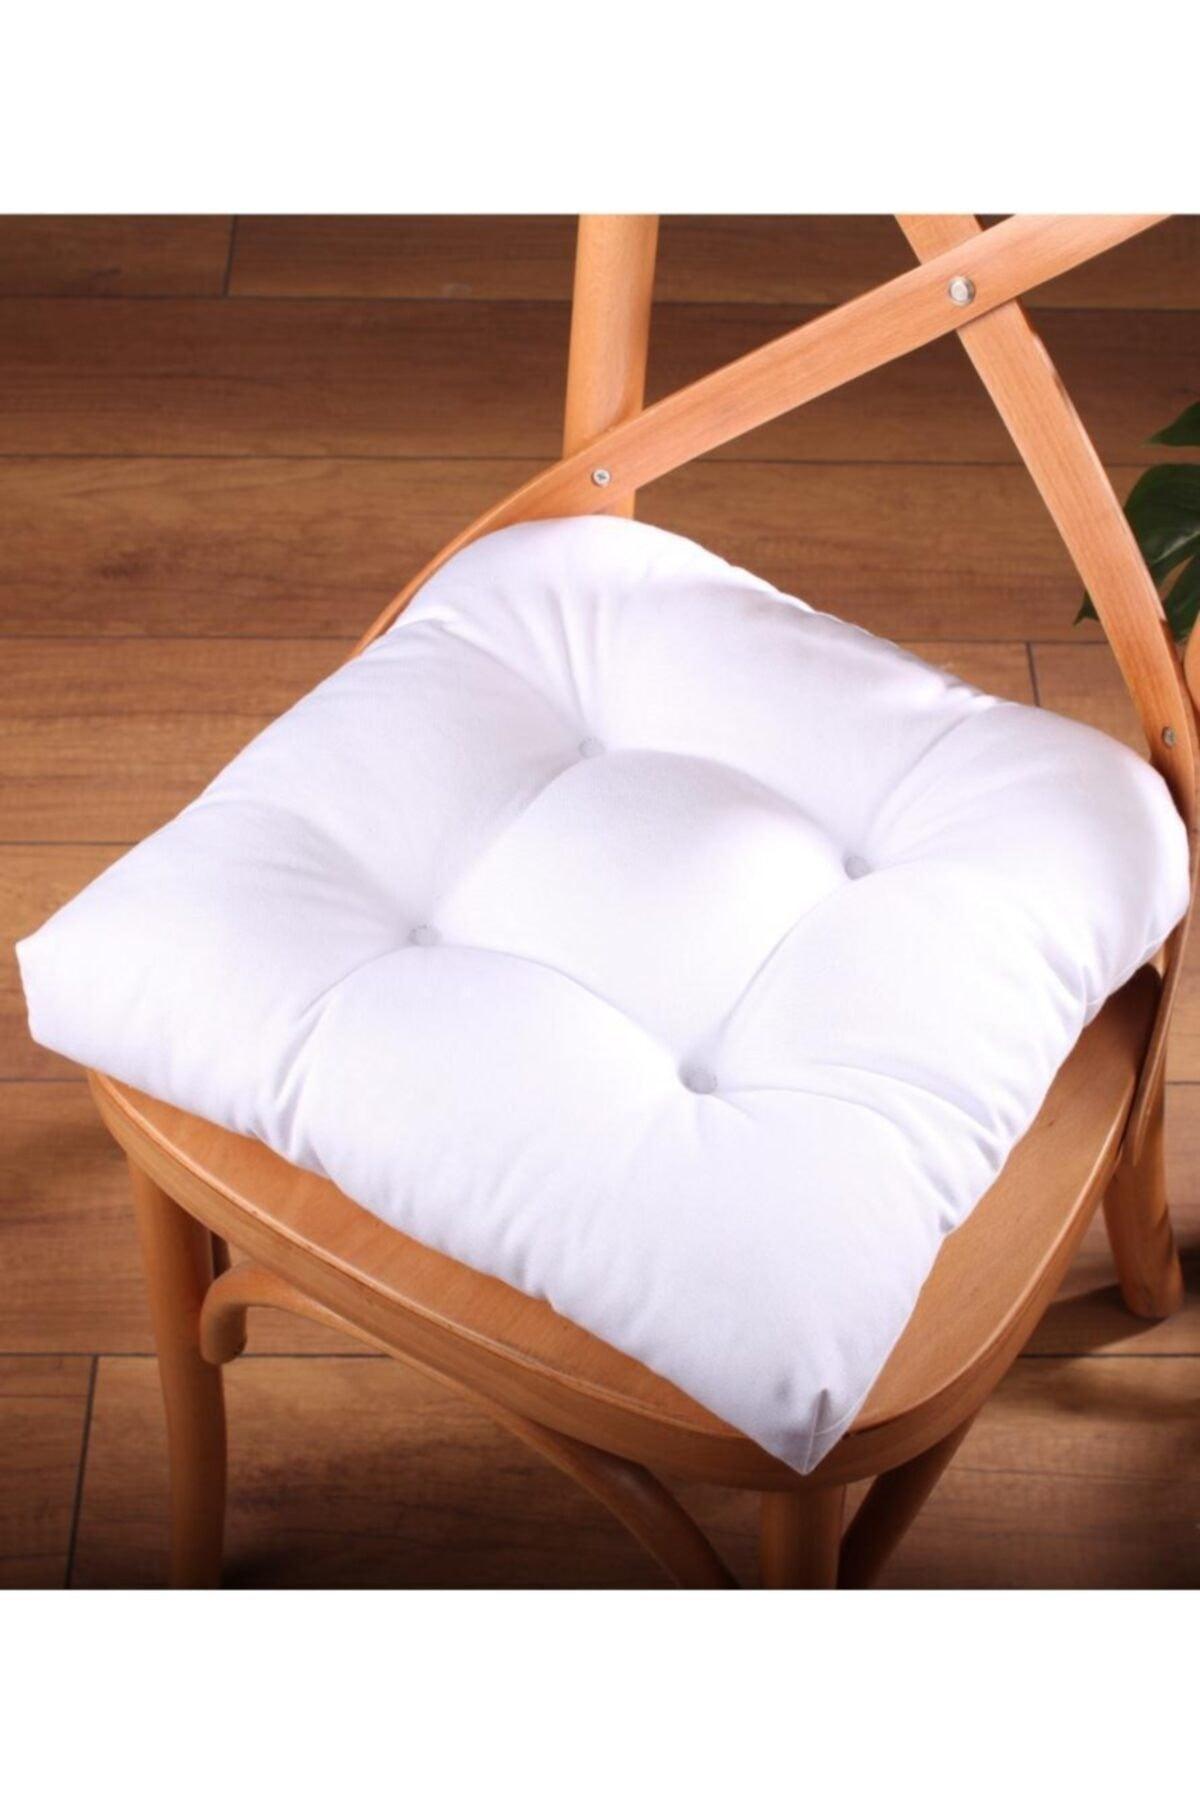 Lux Pofidik White Chair Cushion Special Stitched Laced 40x40cm - Swordslife